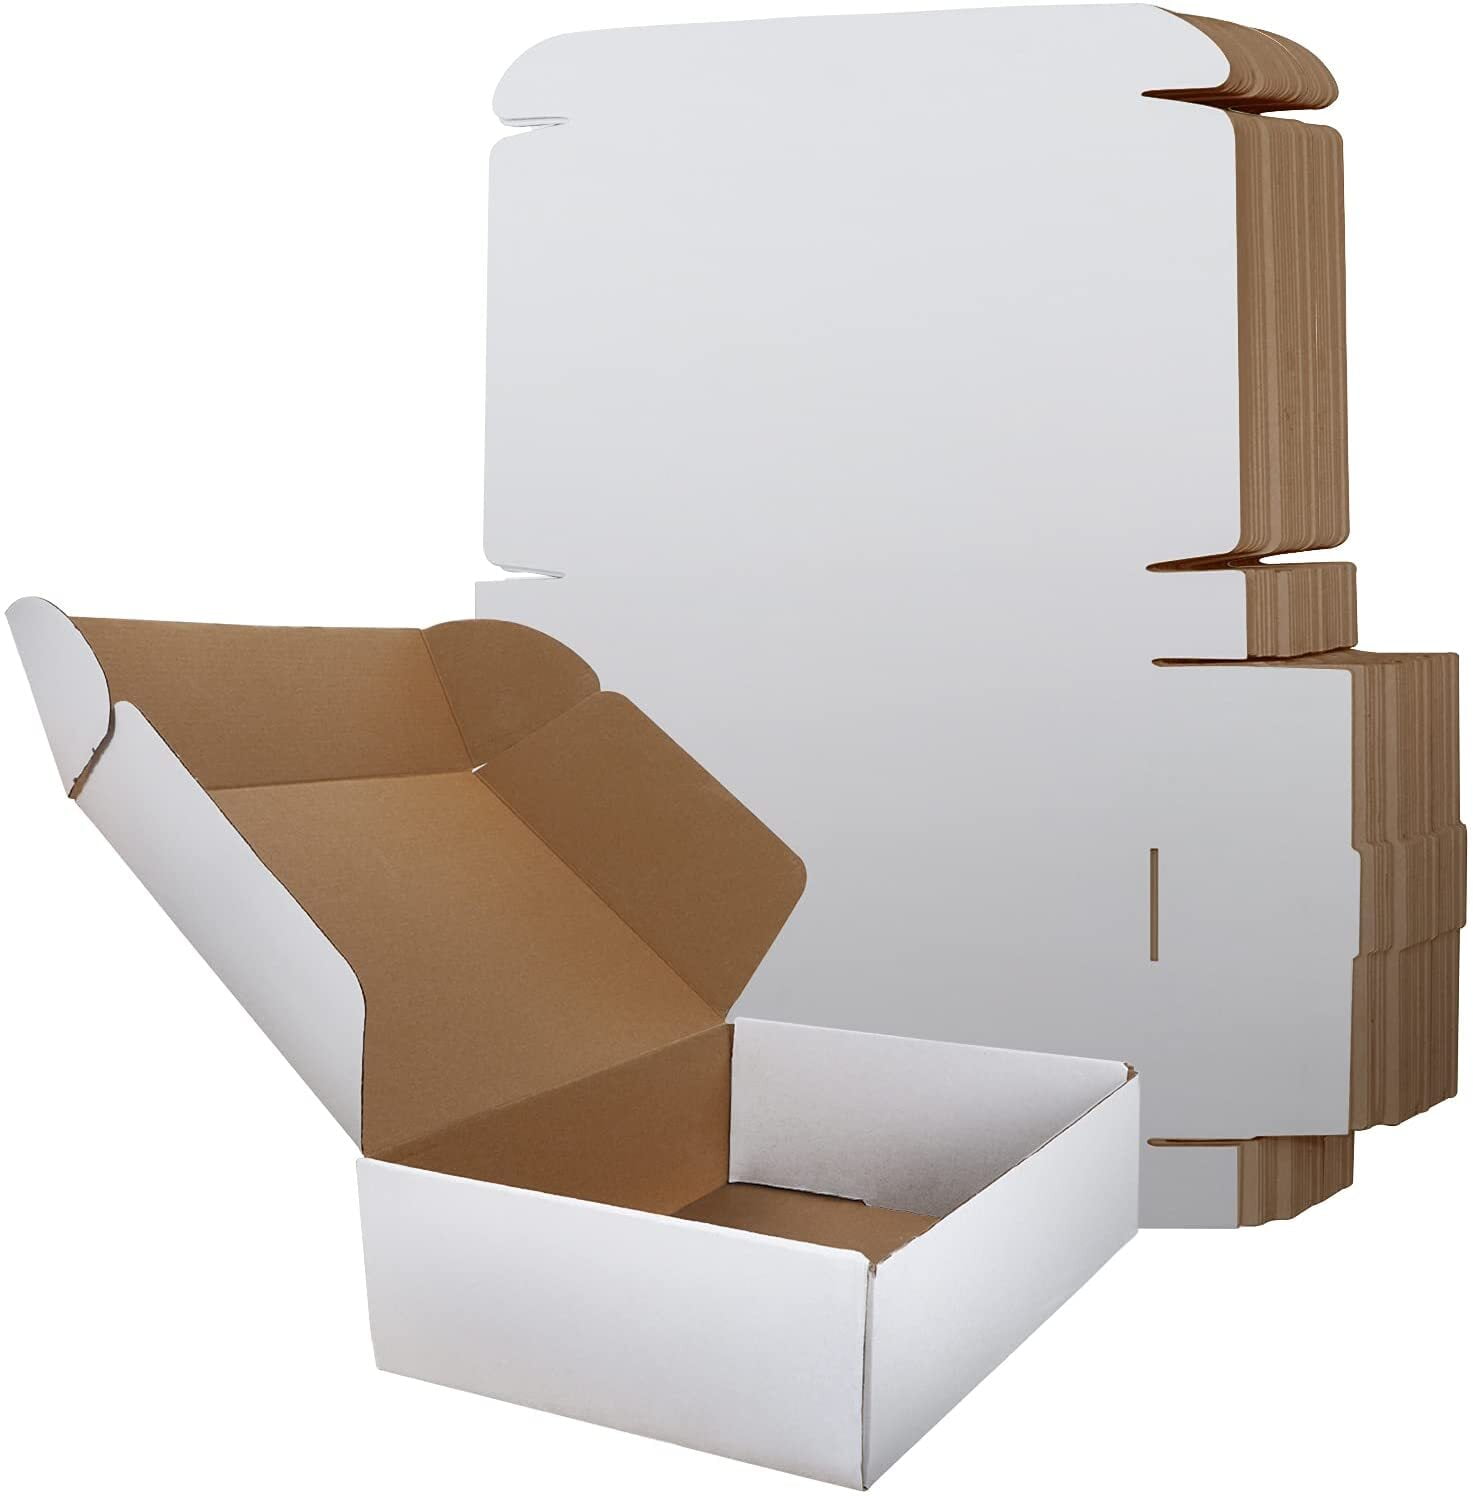 FULL PROTECTION KIT Mirror Cardboard Removal Box Free 24hrs 43 inch Picture 